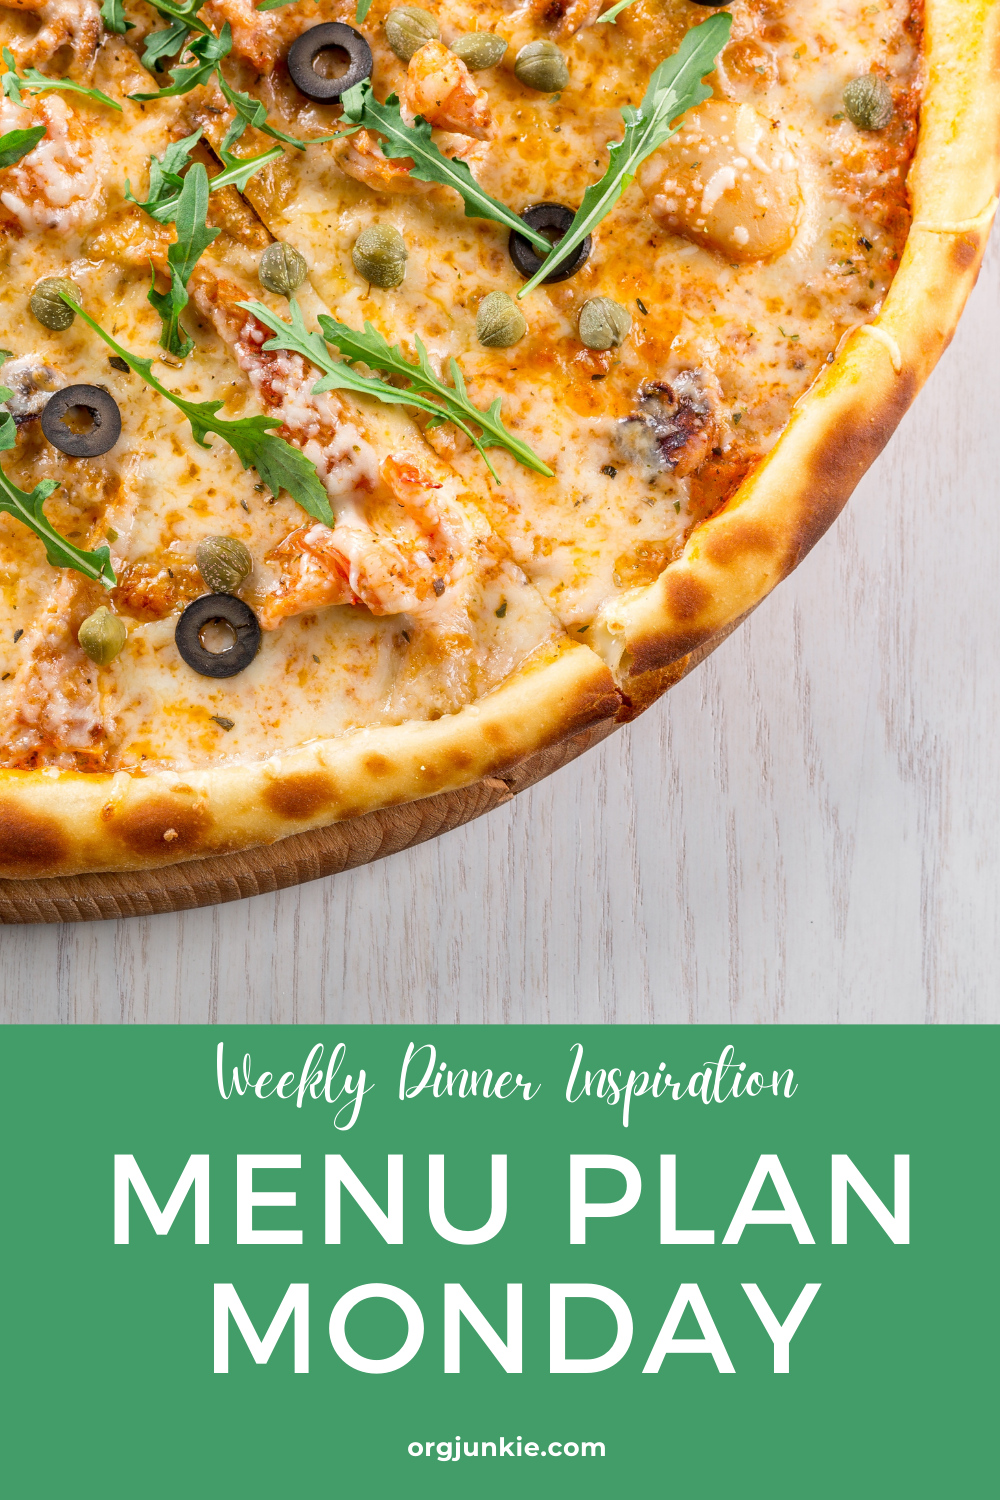 Menu Plan Monday for the week of Nov 9/20 ~ weekly dinner inspiration at I'm an Organizing Junkie